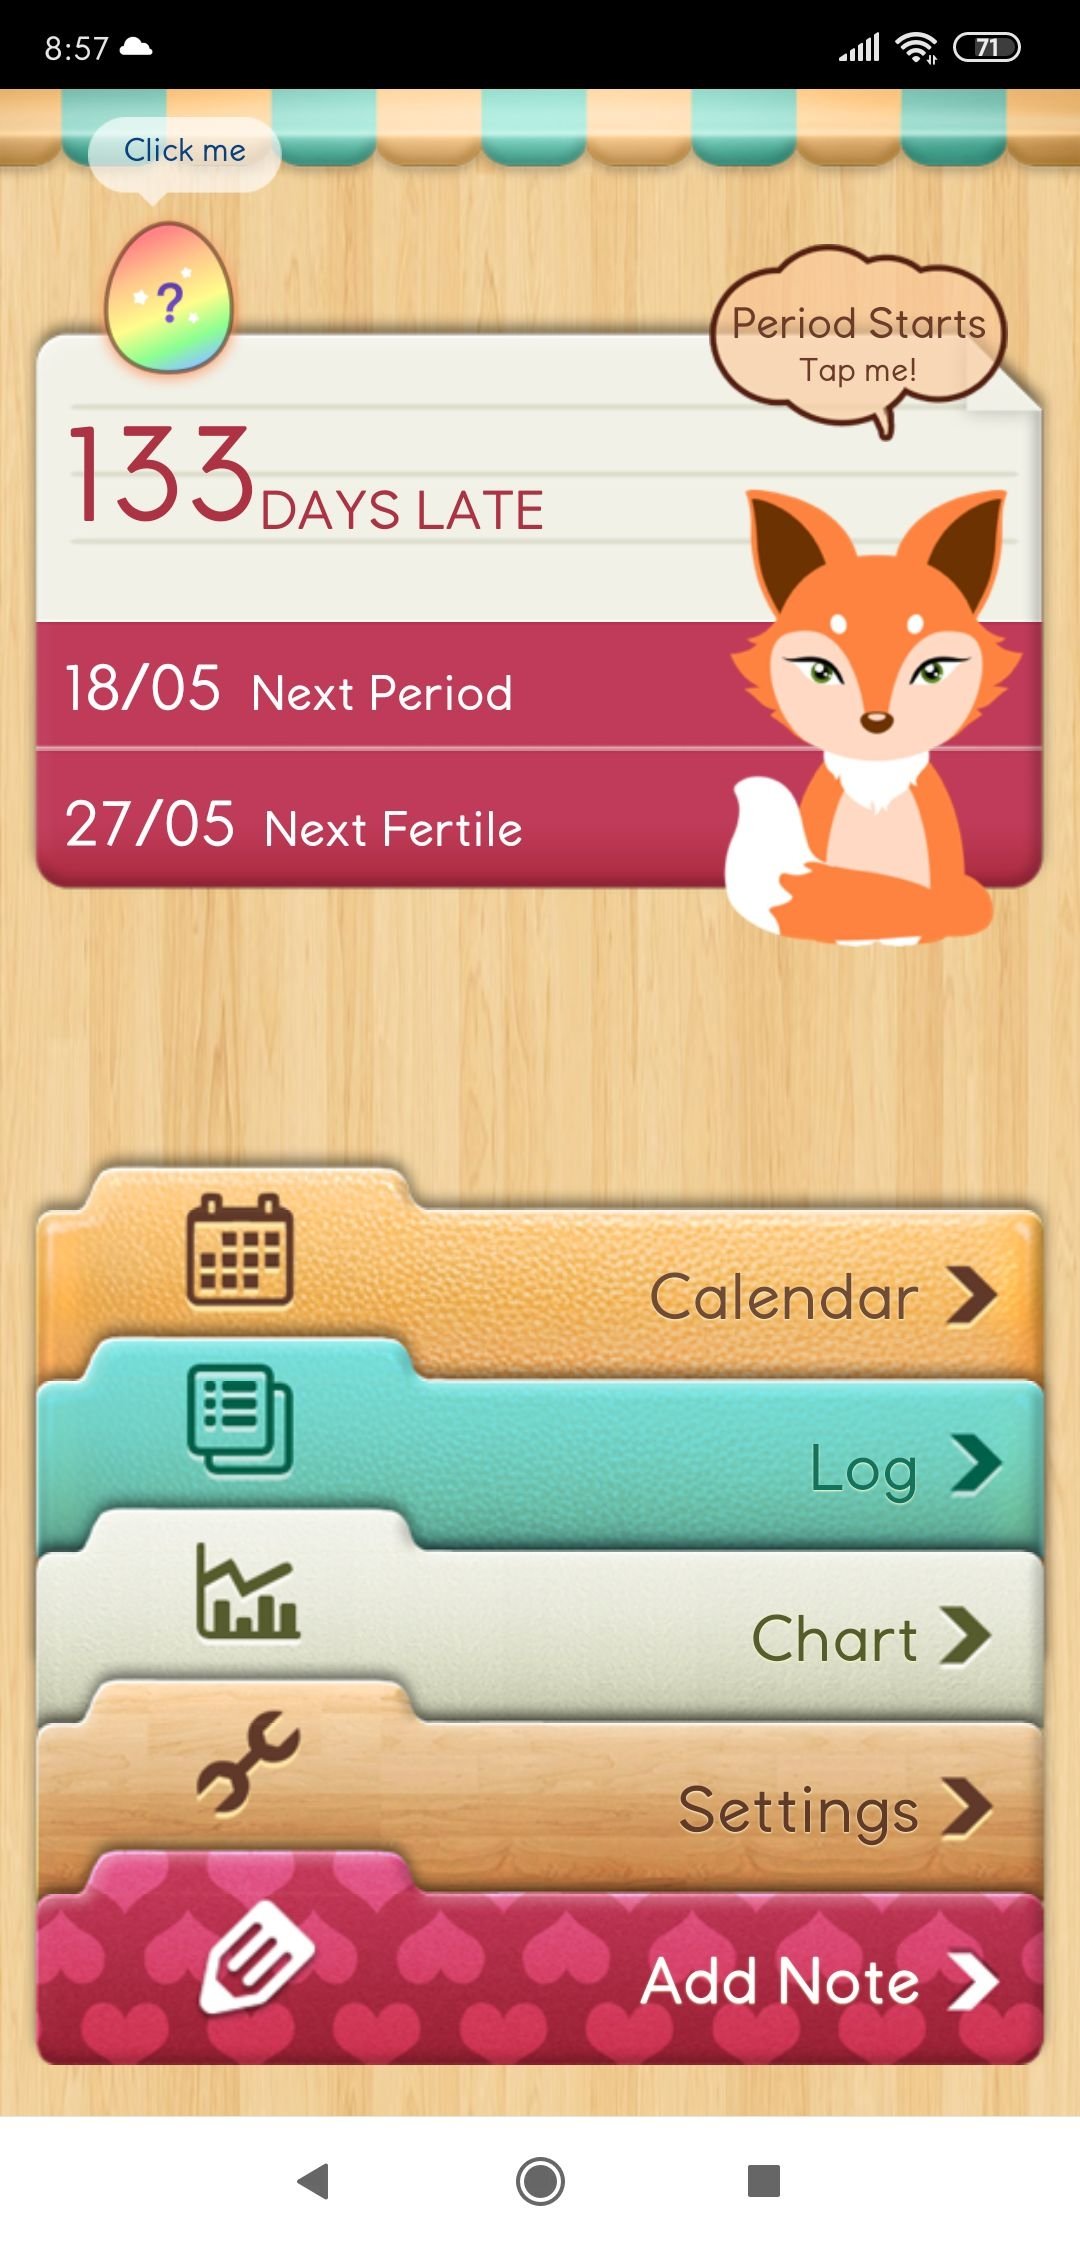 My Period Tracker for Android - Download